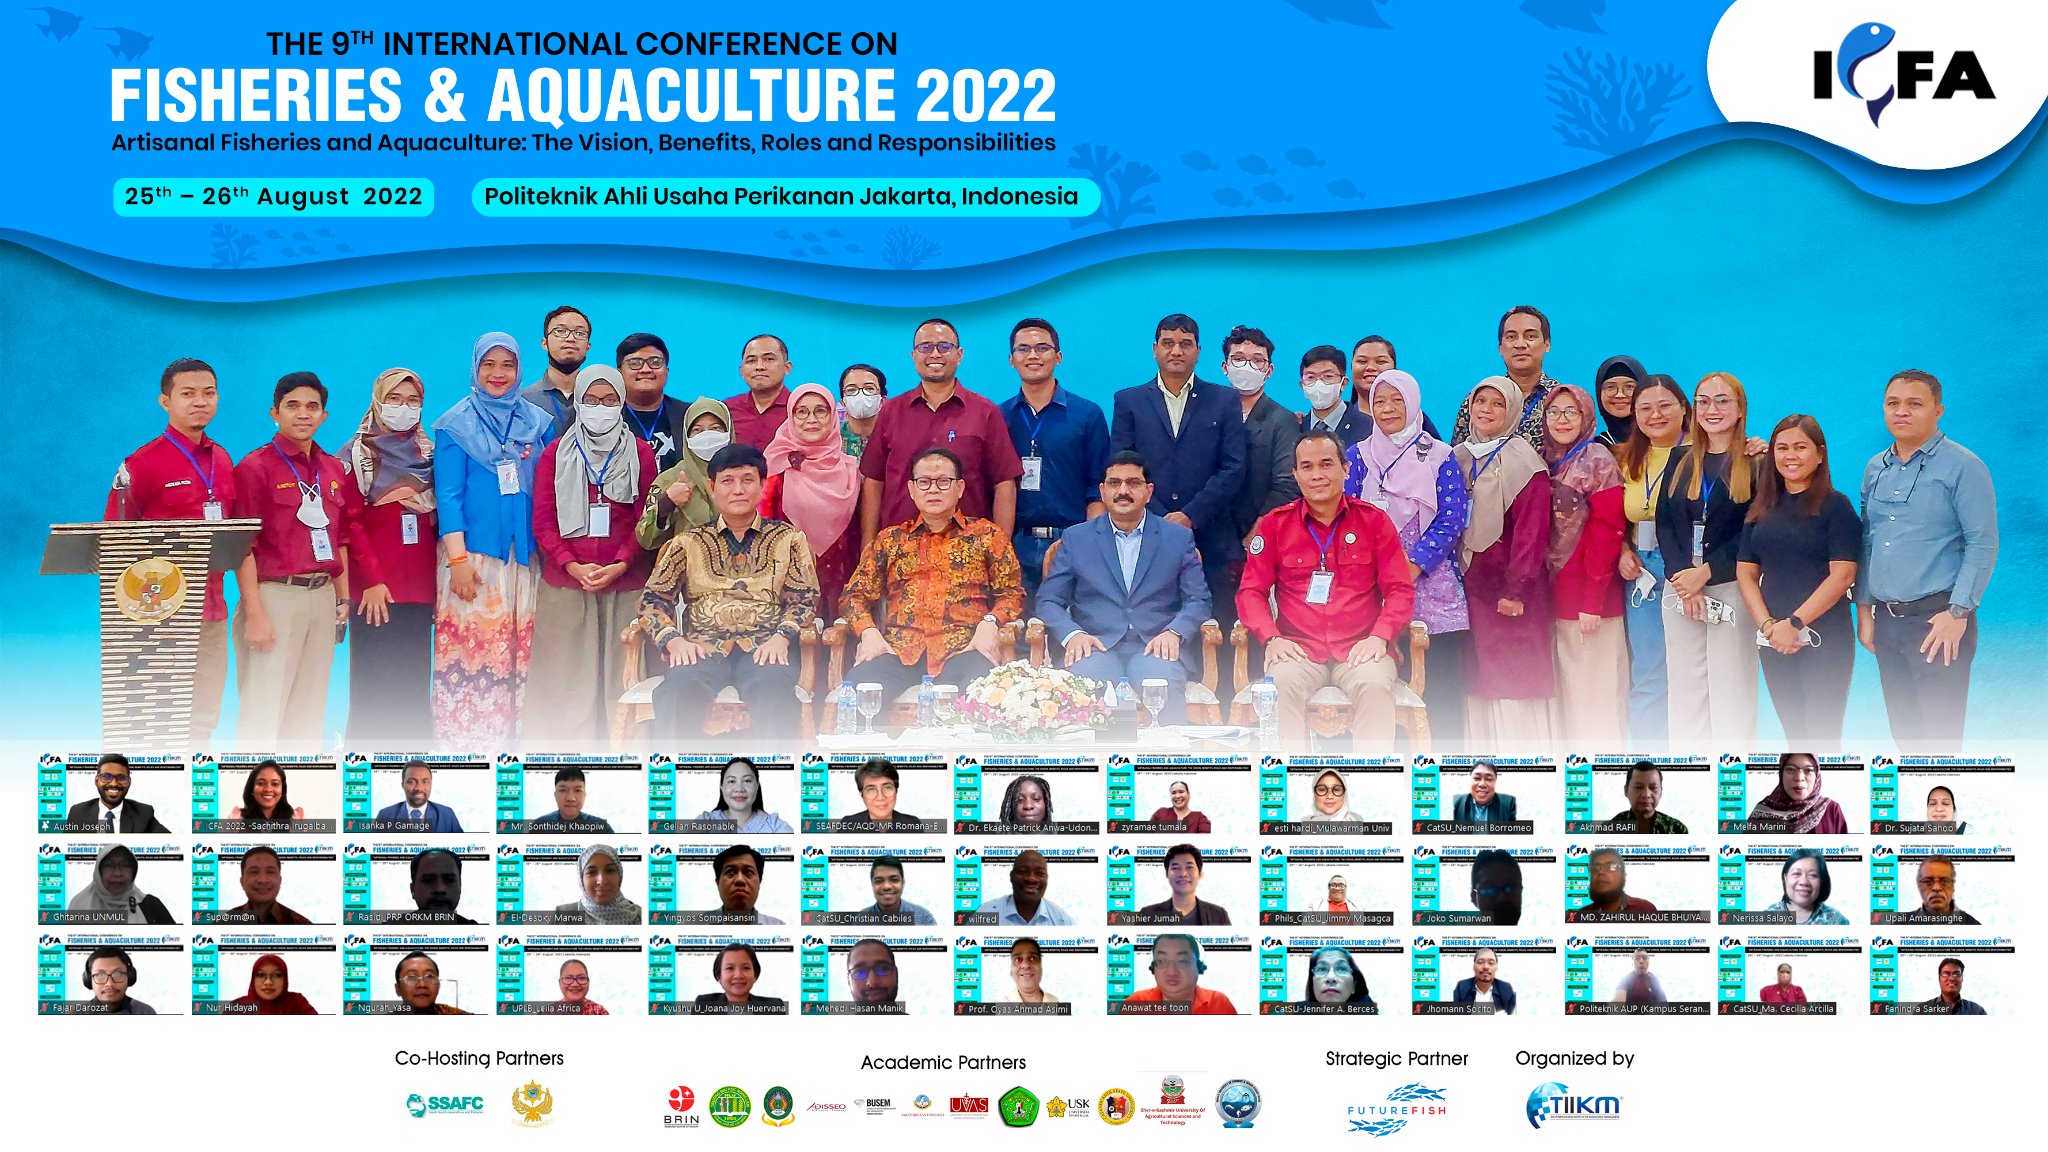 Aquaculture and Fisheries 2022